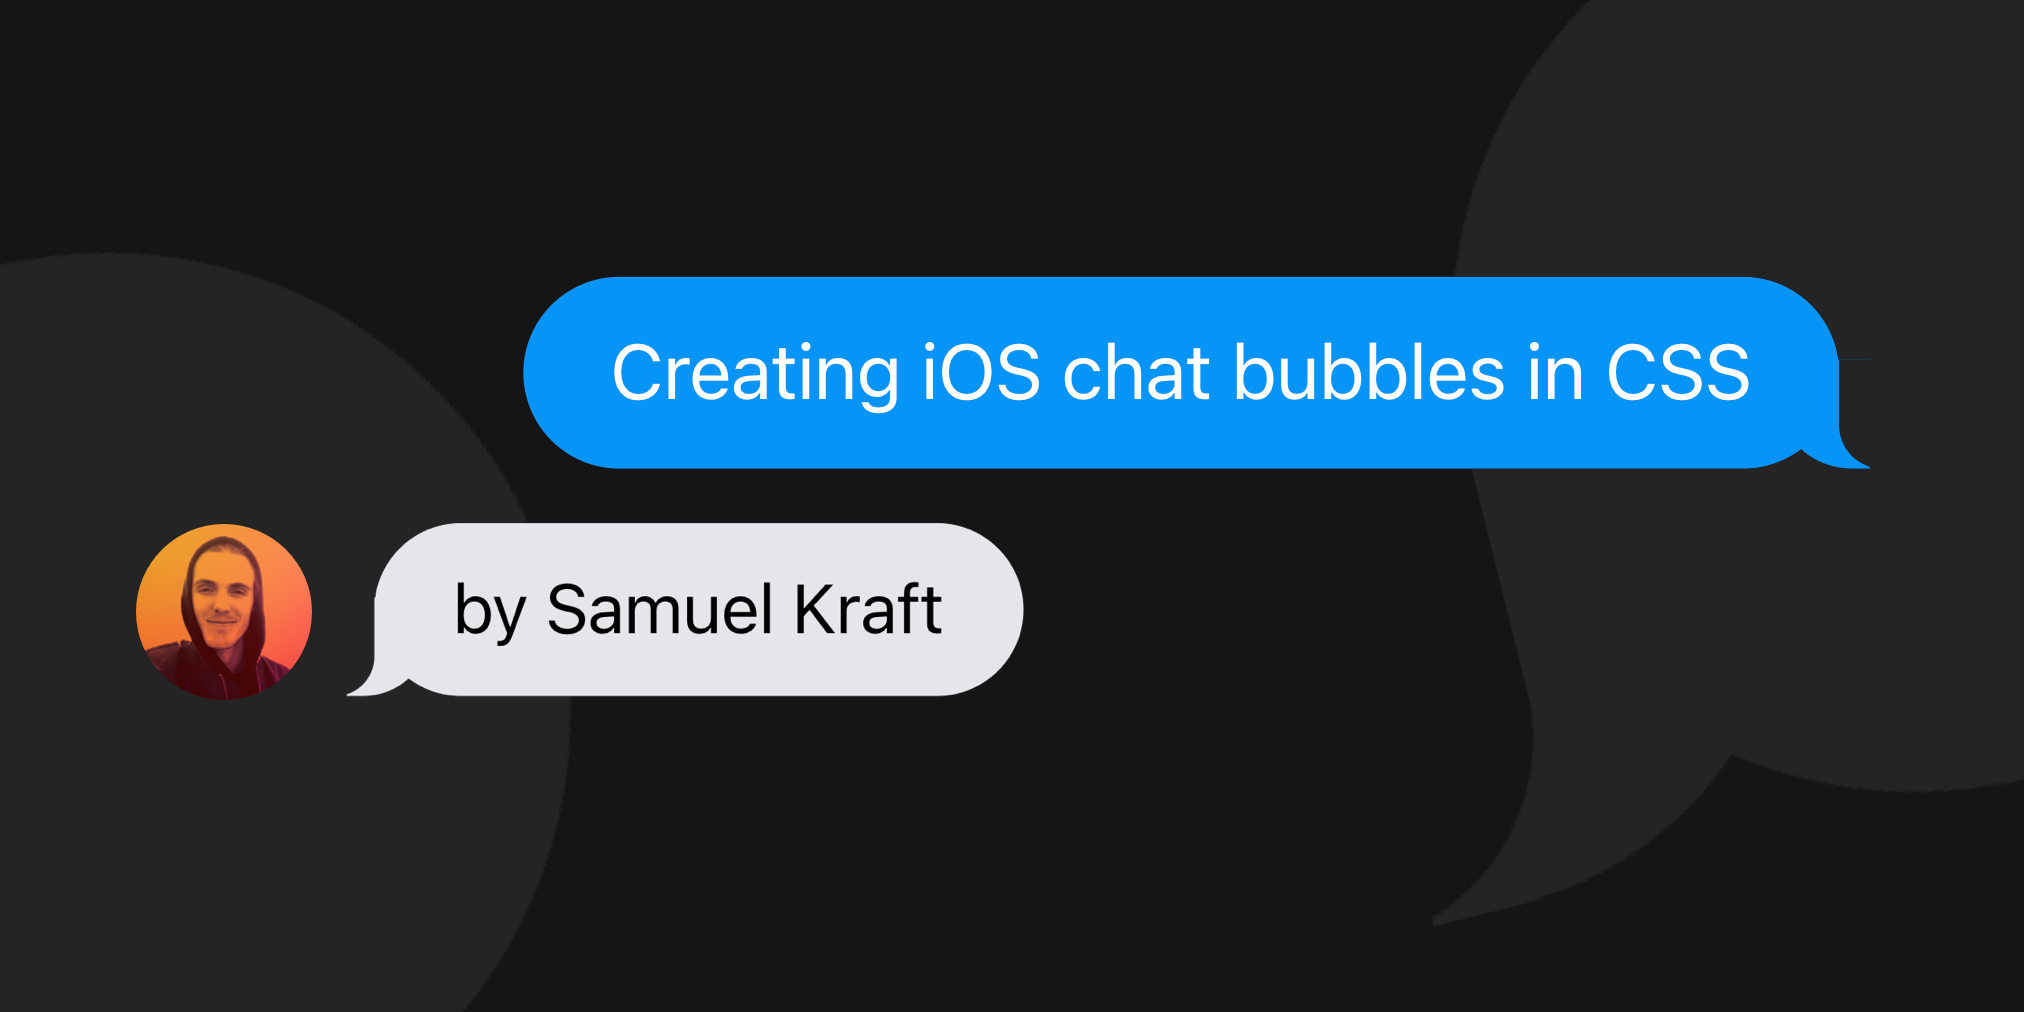 How to create iOS chat bubbles in CSS | Samuel Kraft